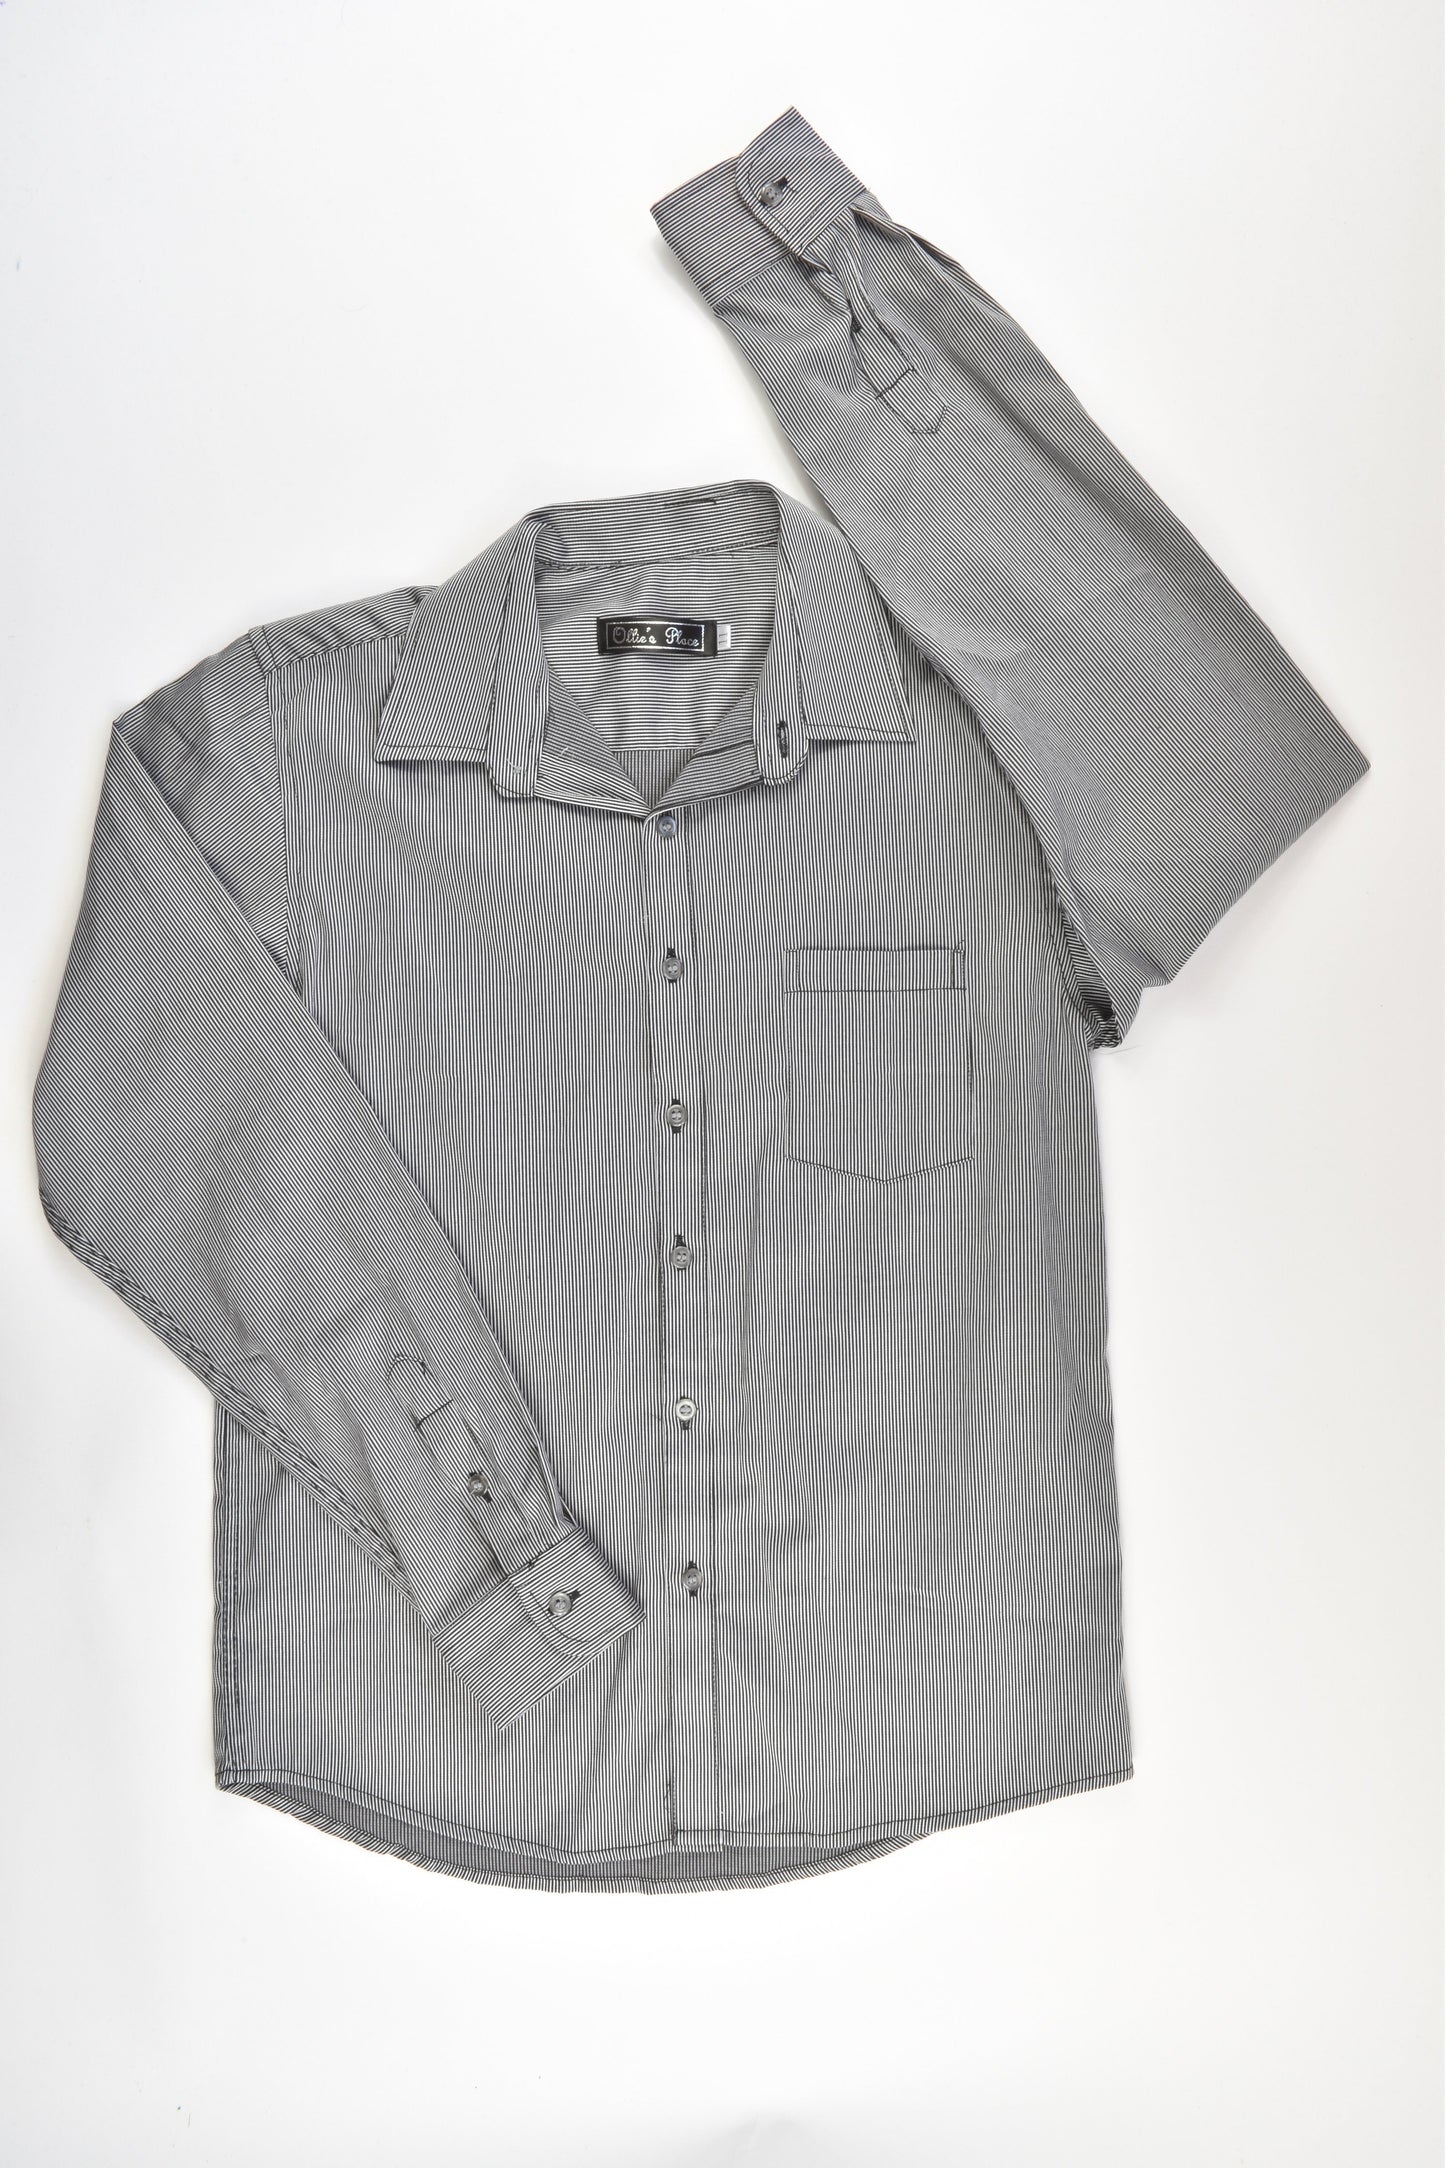 NEW Ollie's Place Size 11 Collared Shirt